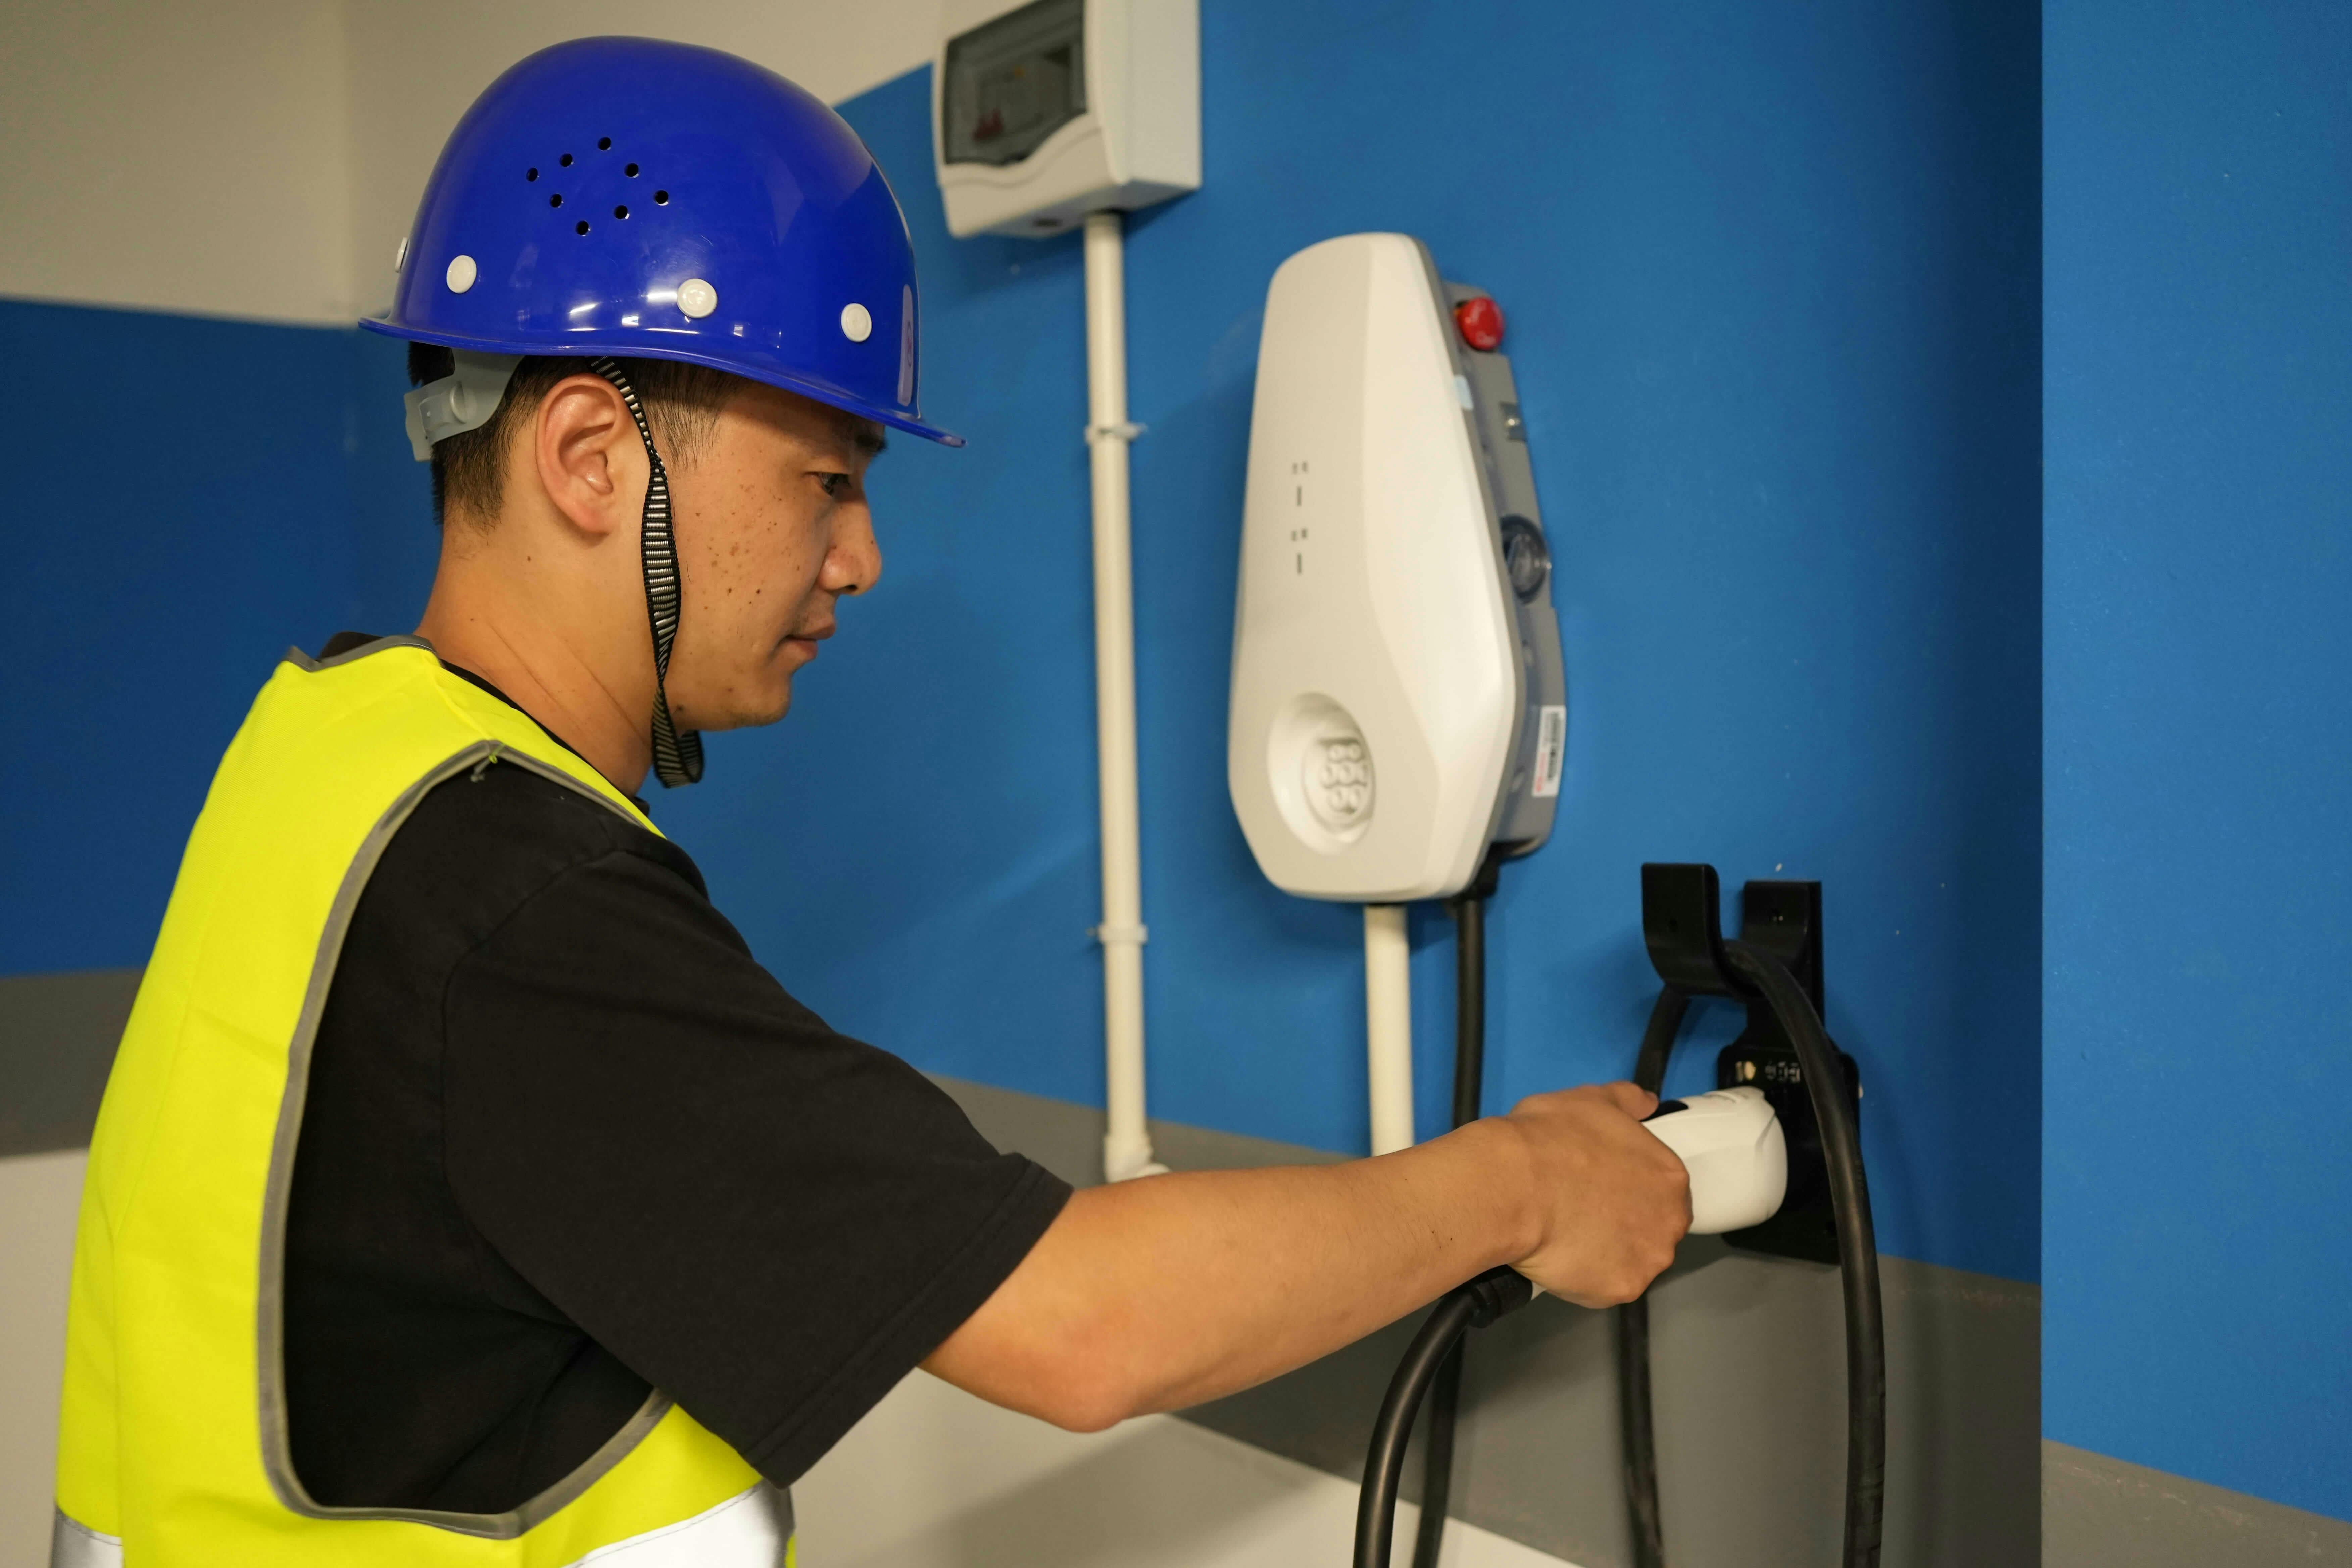 Electric vehicle charger installation: Technician connecting charger to homeowner's power supply